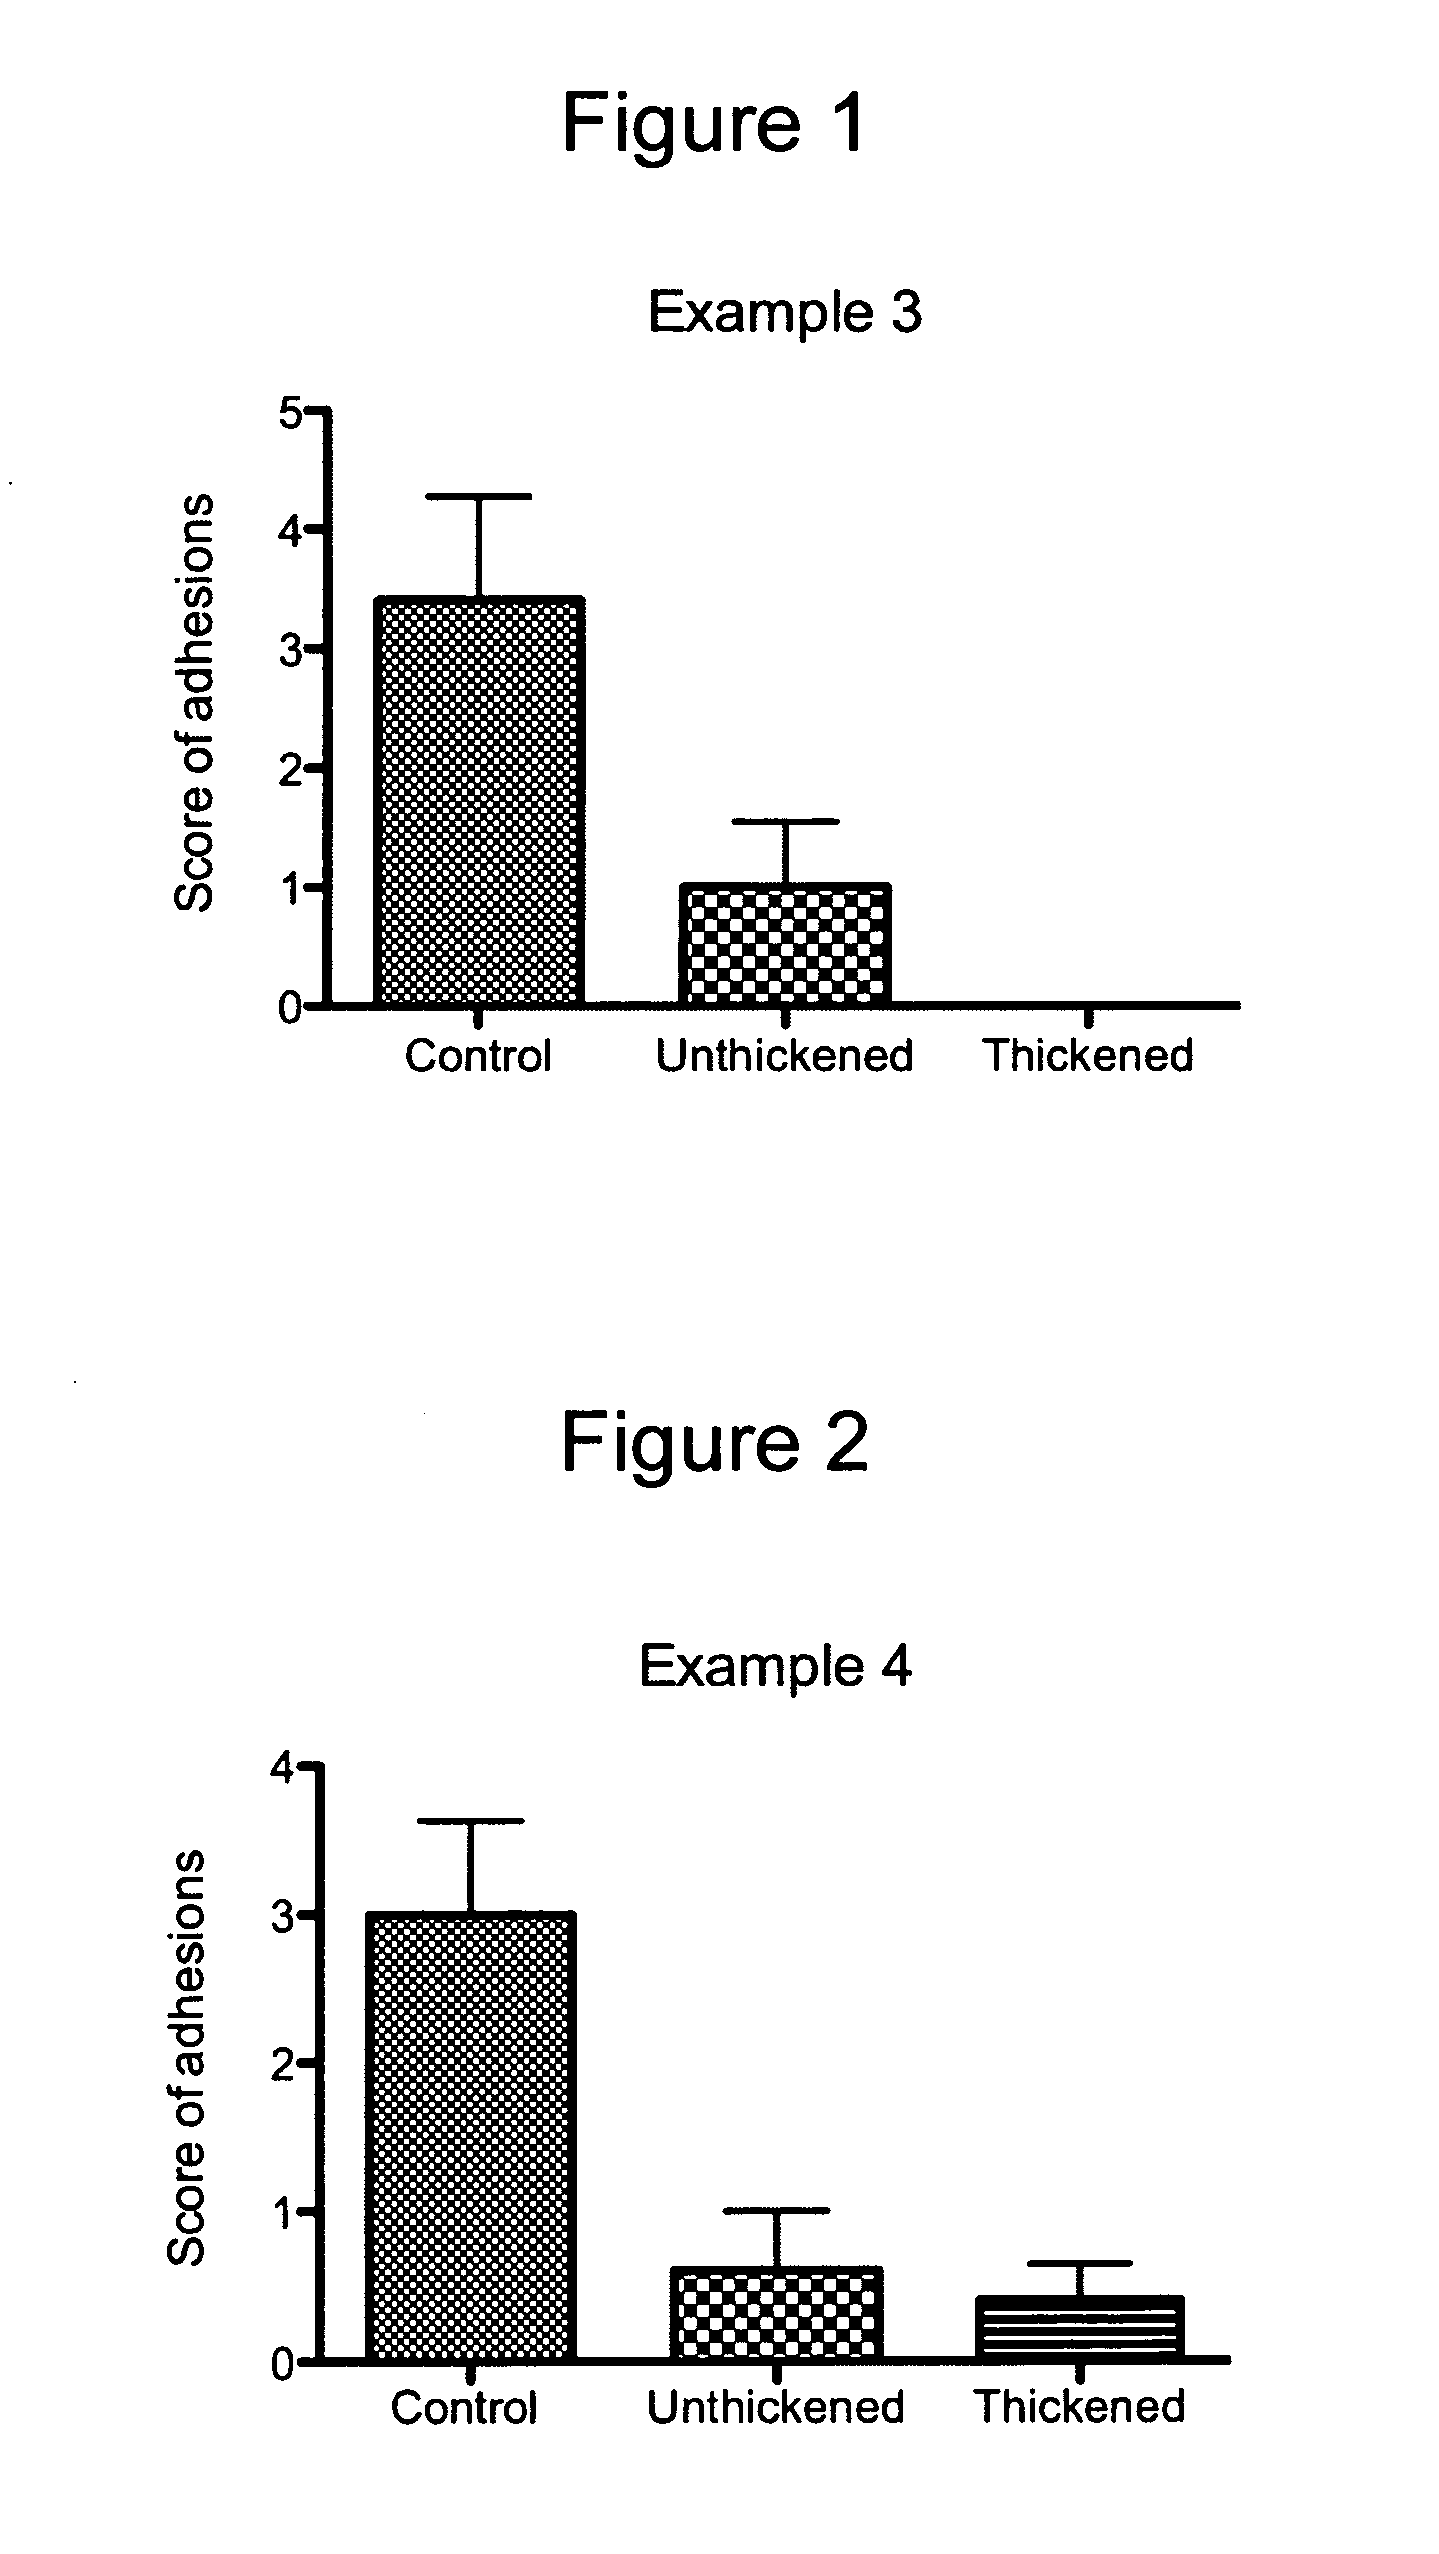 Method for suppressing or preventing fibrous adhesion formation using a multicomponent aqueous oxychlorine composition prepared on-site